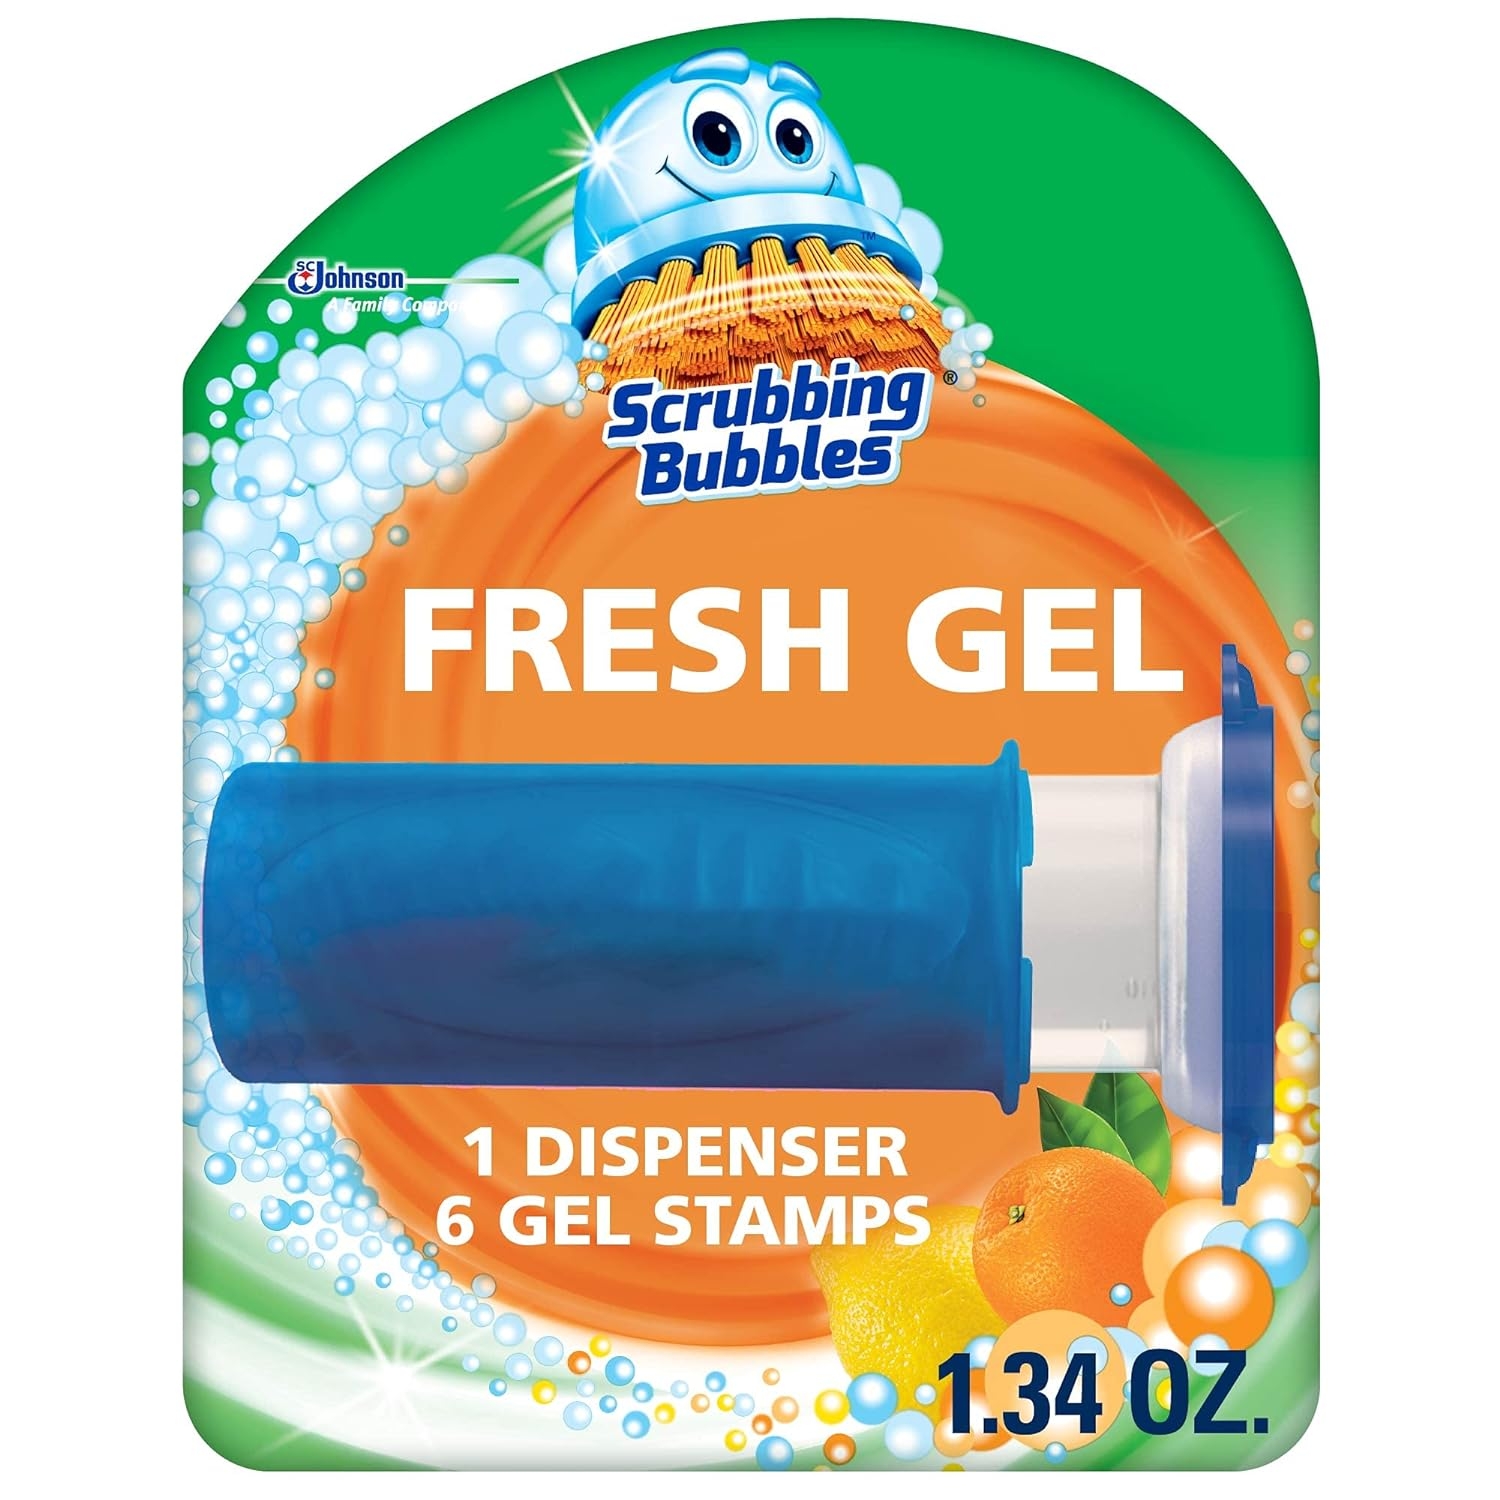 Scrubbing Bubbles Fresh Gel Toilet Bowl Cleaning Stamps, Gel Cleaner, Helps Prevent Limescale and Toilet Rings, Citrus Scent, 6 Stamps